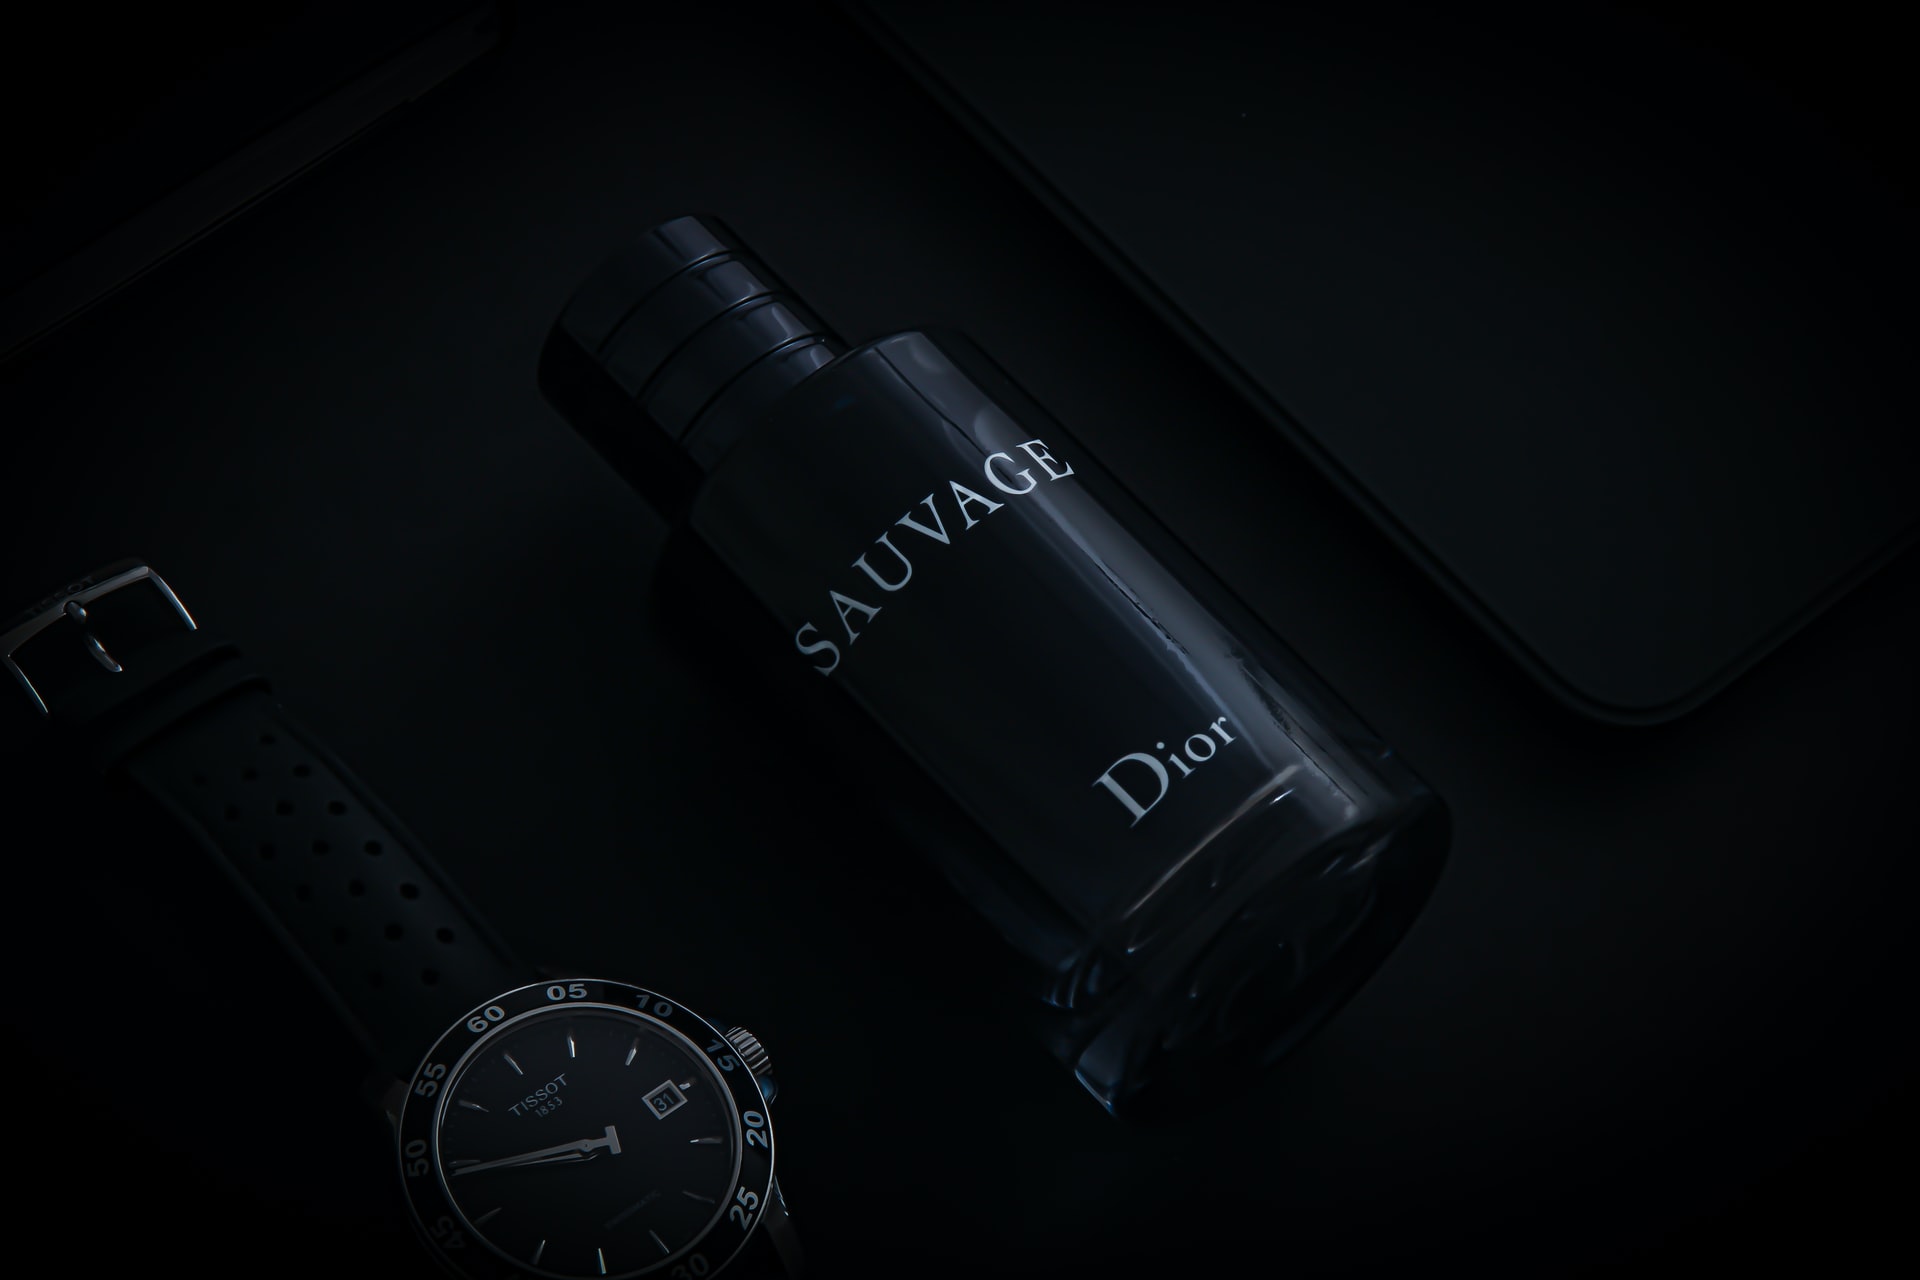 Dior Sauvage Dossier Review